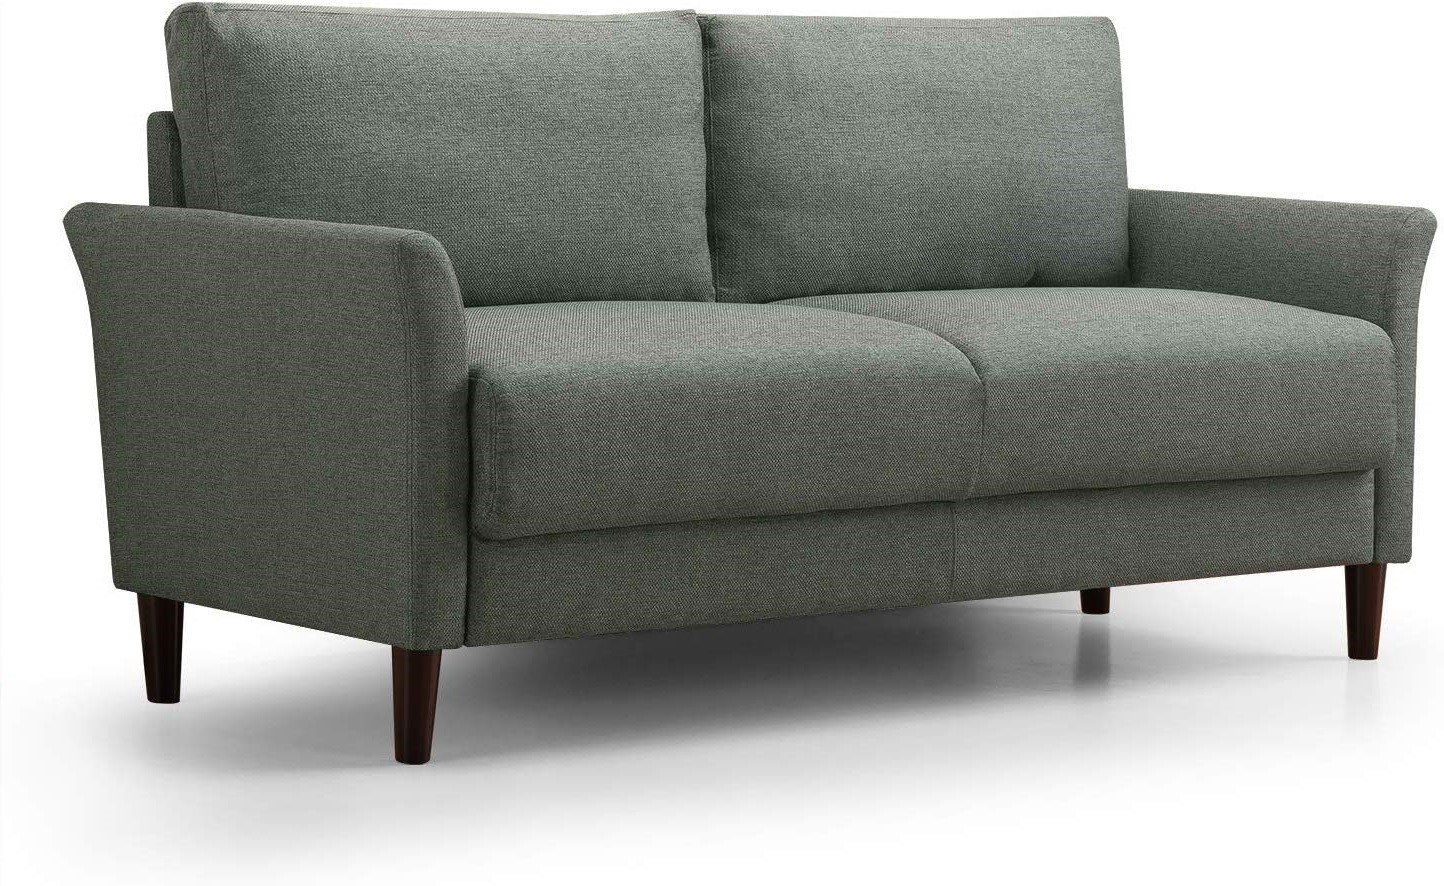 8 Best Sectional Sofas Under $300 (2023 Upd.) | Top Sectionals!